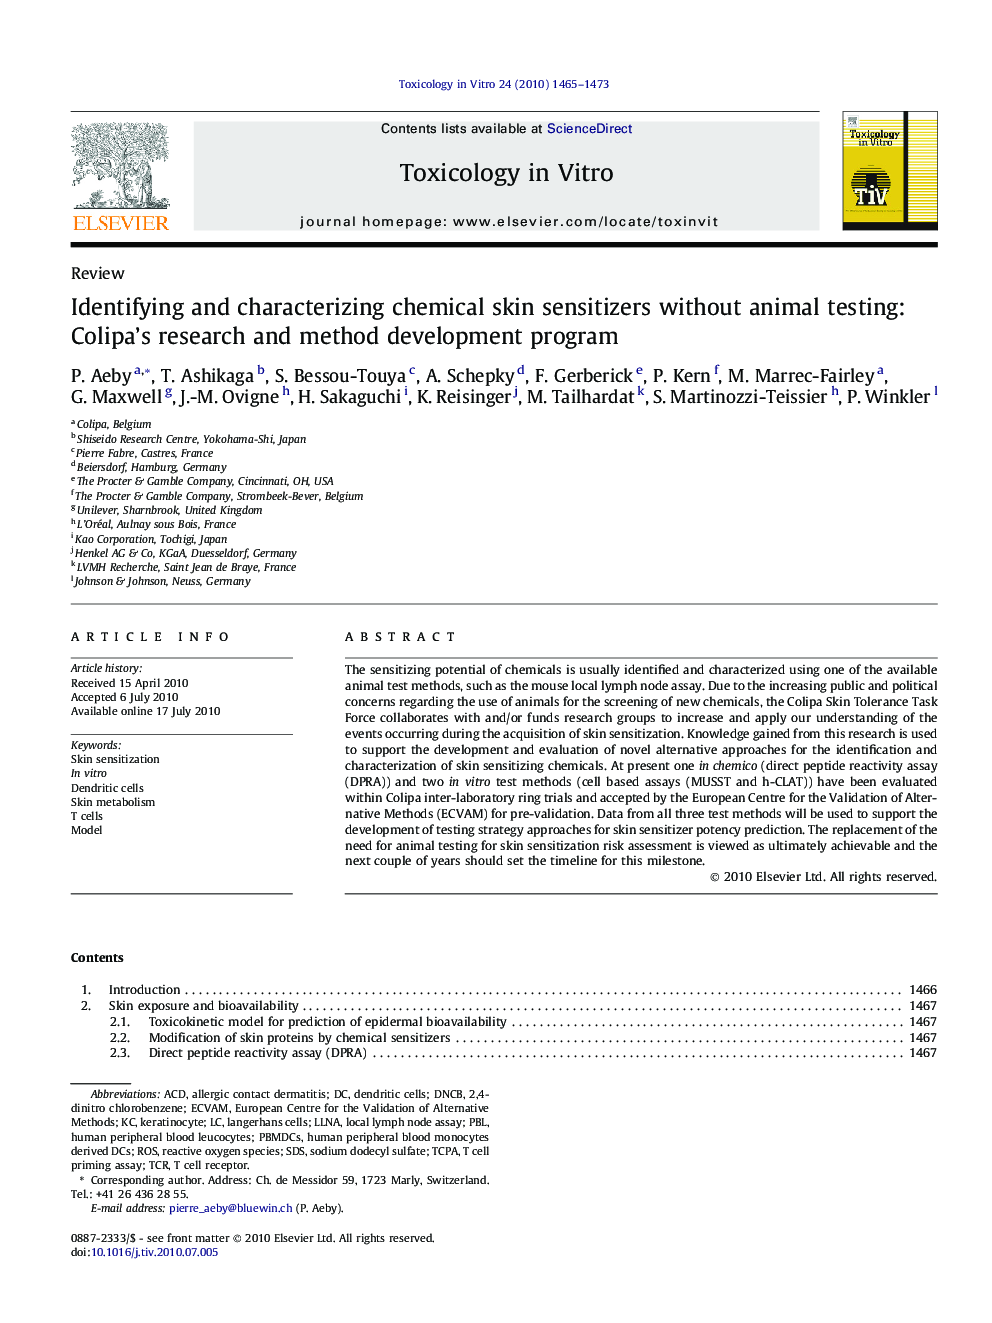 Identifying and characterizing chemical skin sensitizers without animal testing: Colipa’s research and method development program